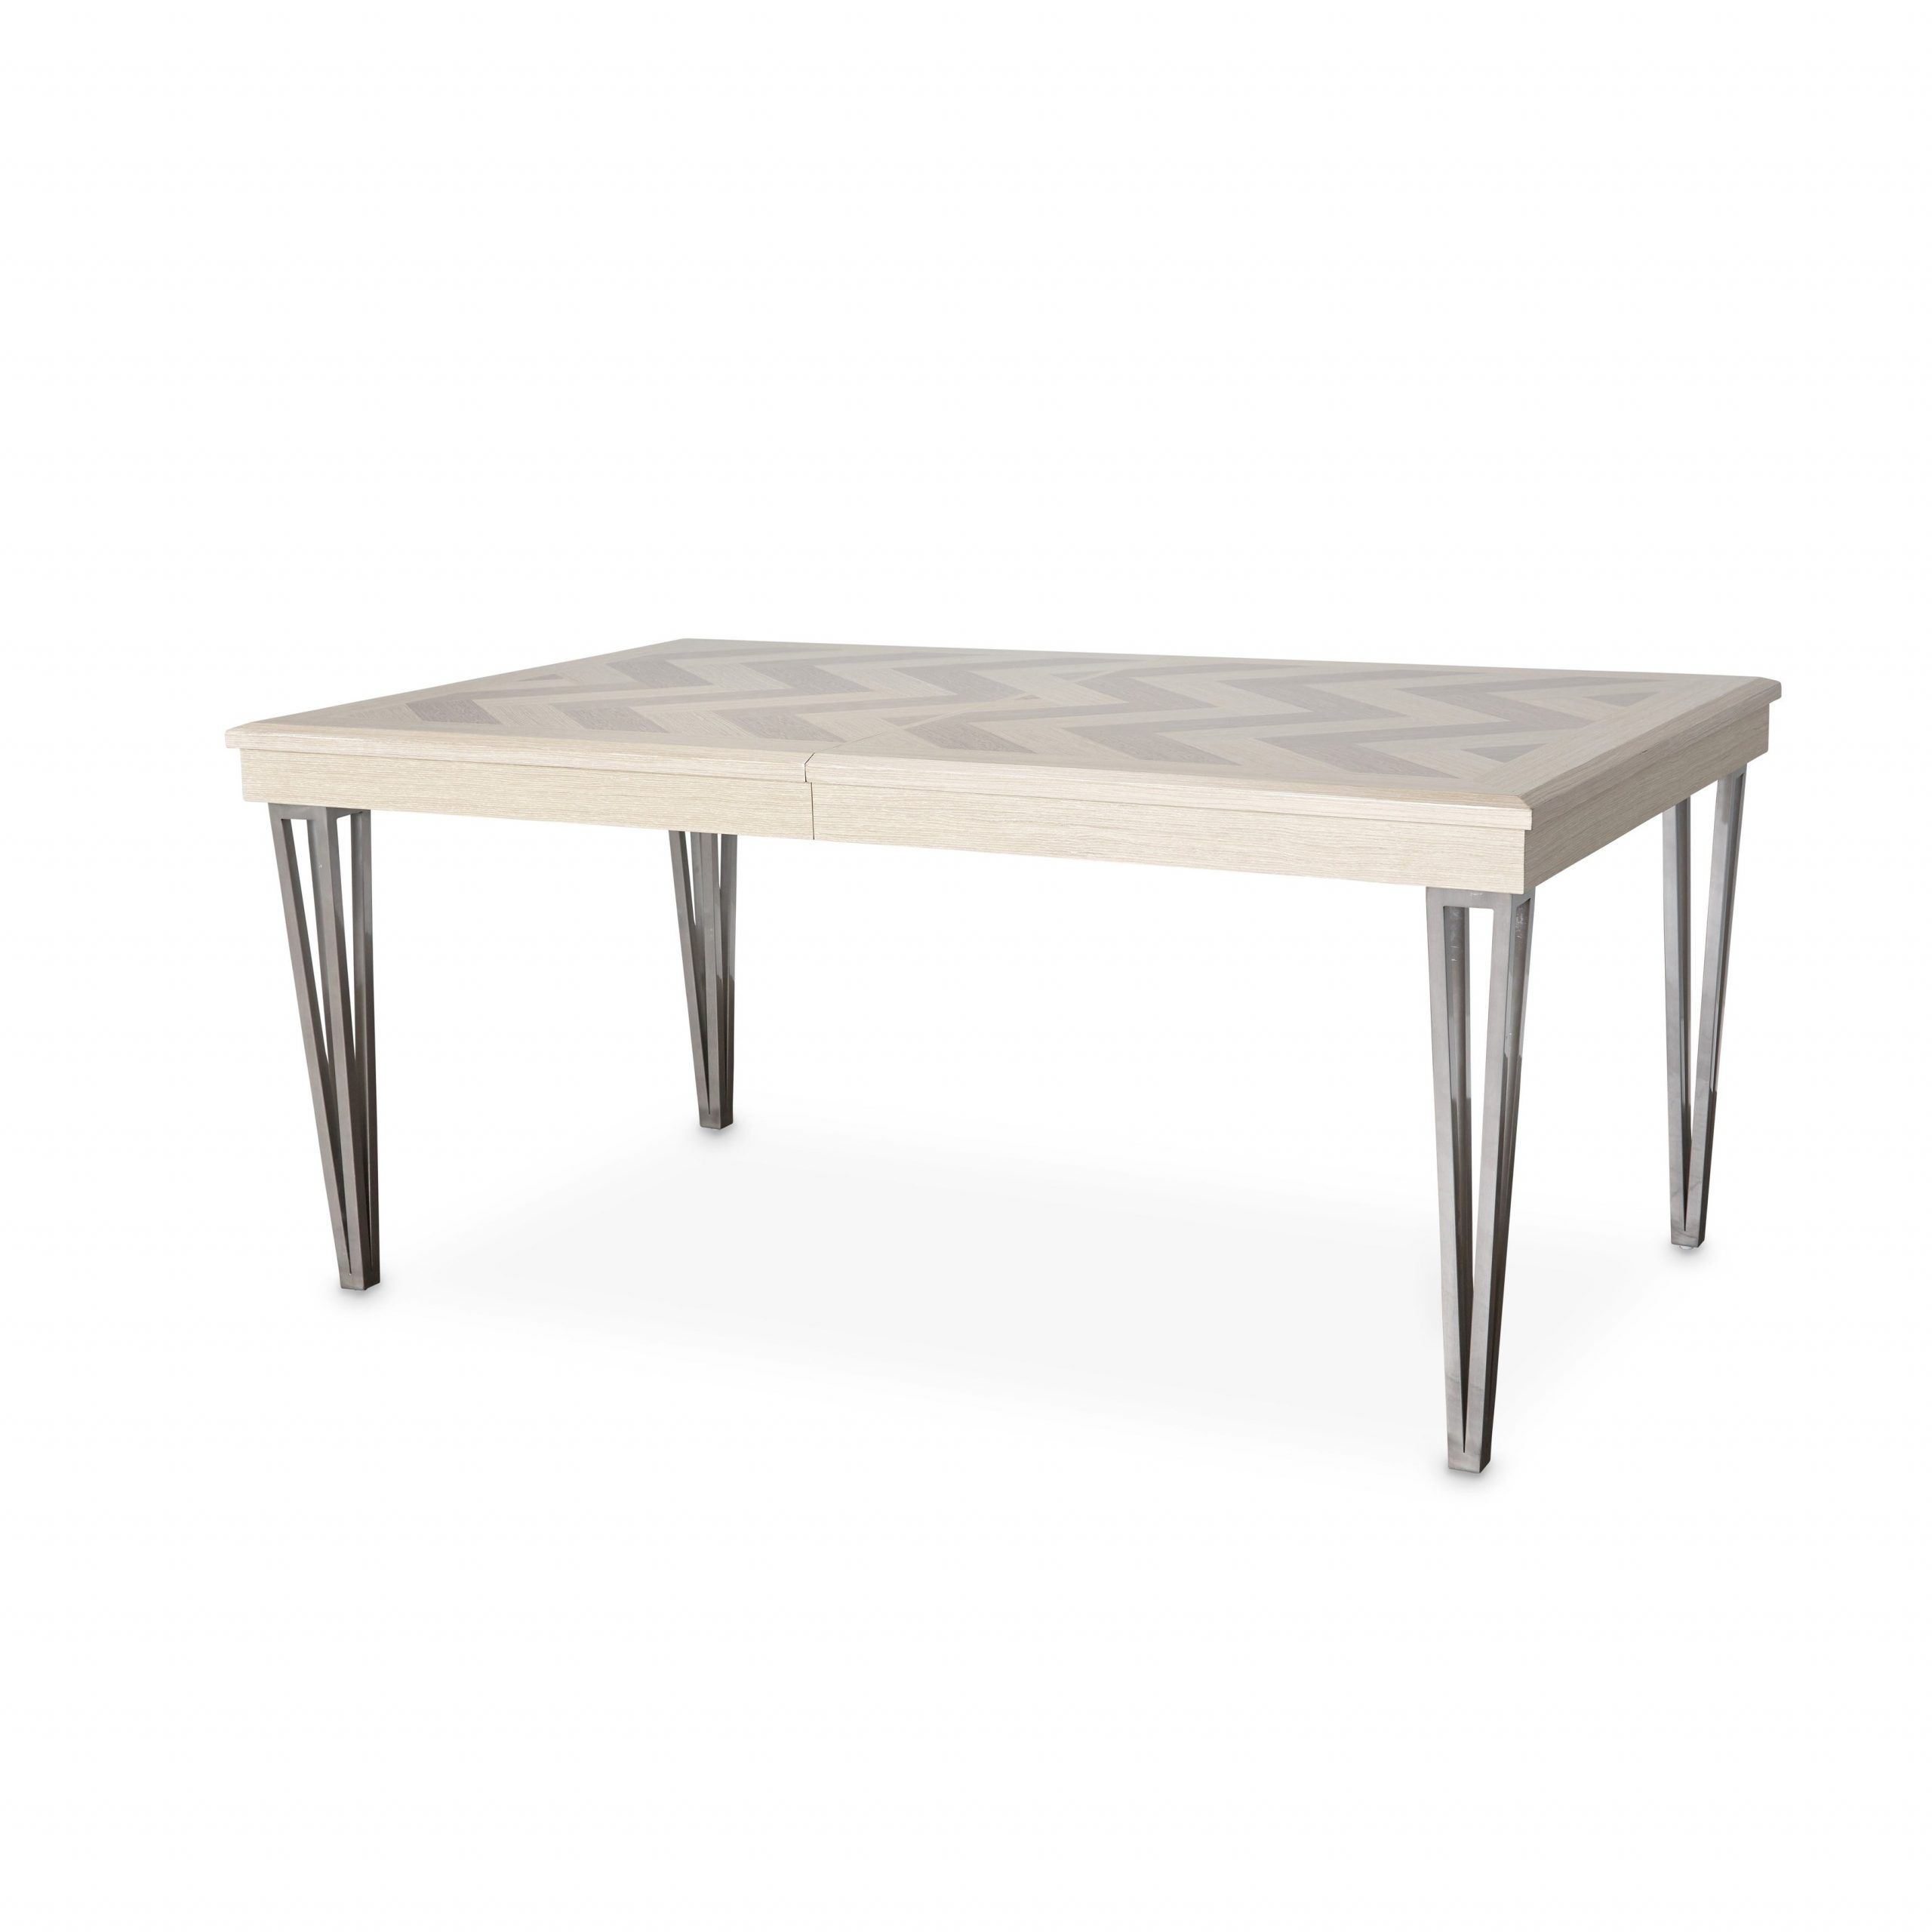 Buy Michael Amini Kitchen & Dining Room Tables Online At Within 2017 Menlo Reclaimed Wood Extending Dining Tables (View 15 of 25)